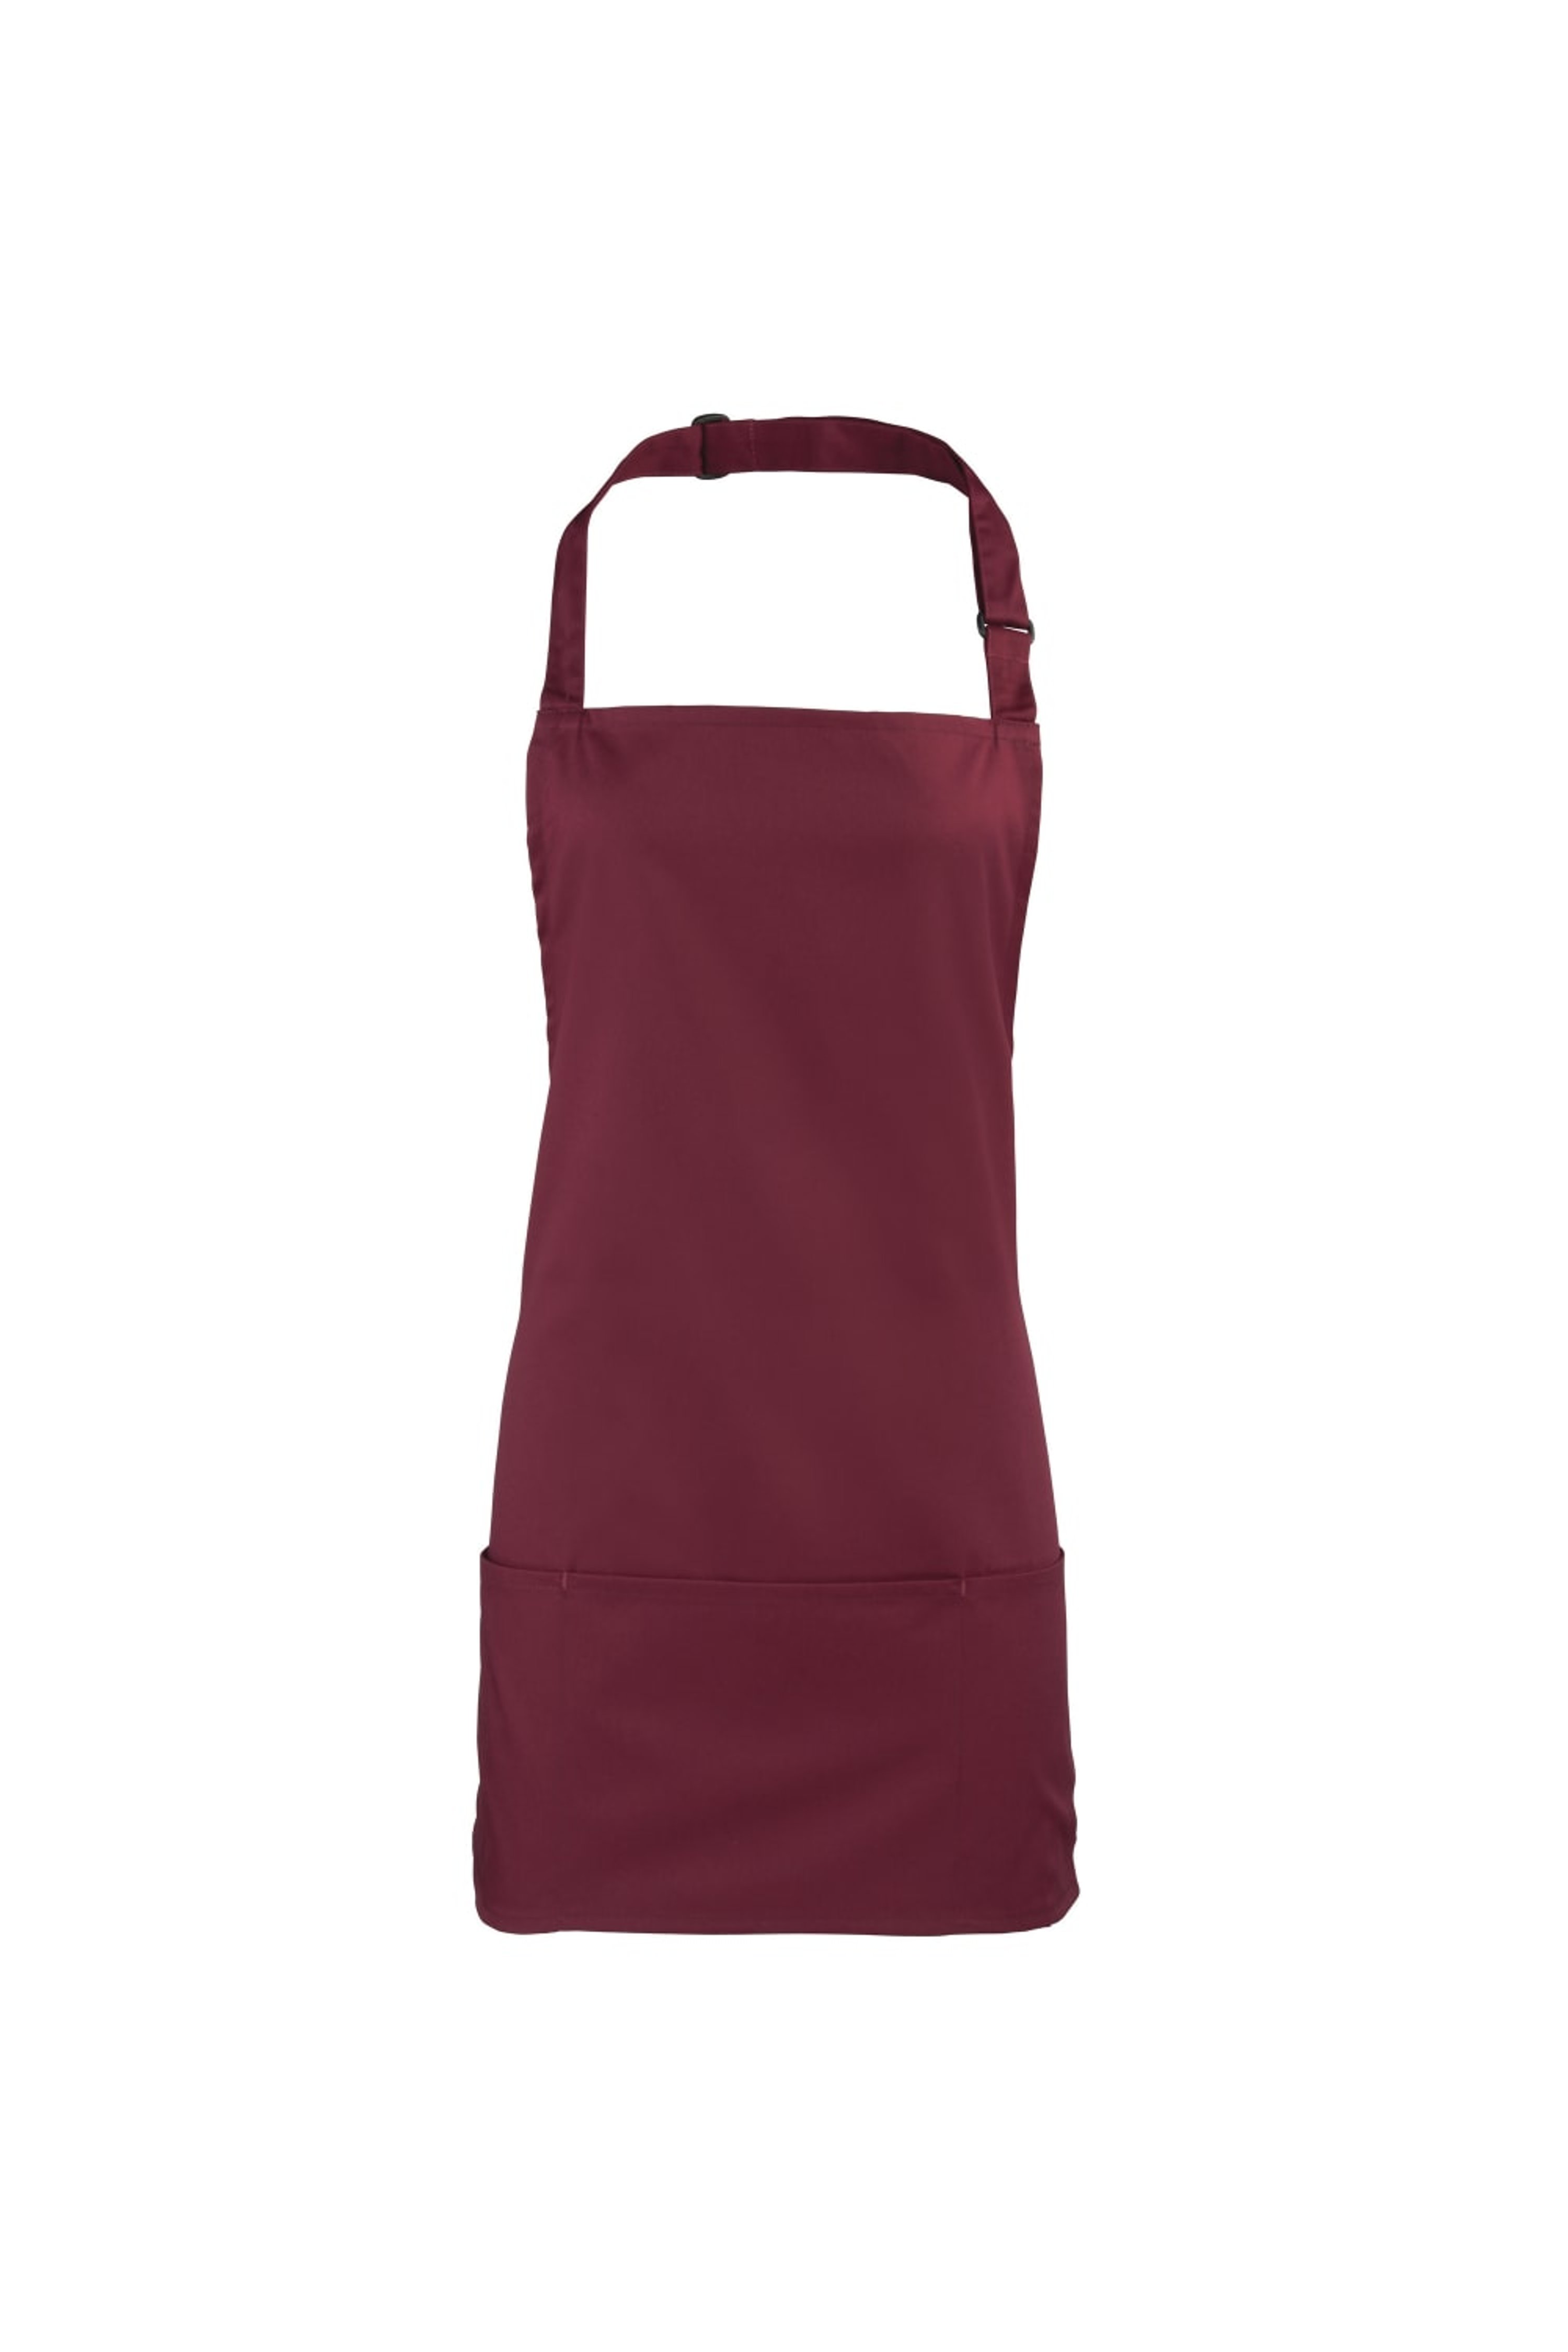 PREMIER PREMIER PREMIER COLOURS 2-IN-1 APRON / WORKWEAR (PACK OF 2) (BURGUNDY) (ONE SIZE)